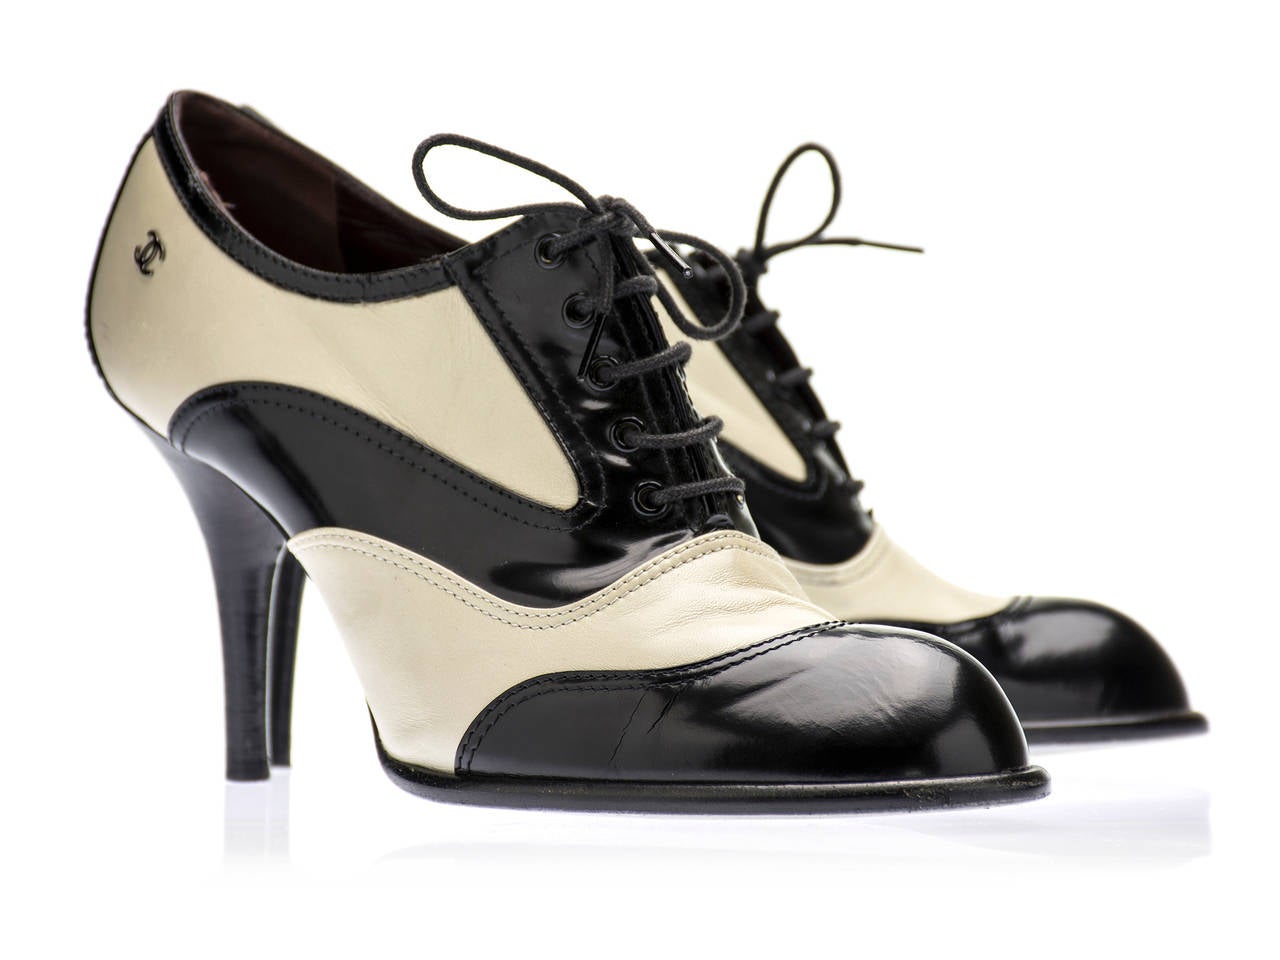 This two tone black and cream patent leather heel is classy and definitely head turning! Classic round toe with a lace up design and contrasting color combination reminisces vintage shoe style of the 30s. A silver CC logo on the side of the shoe.